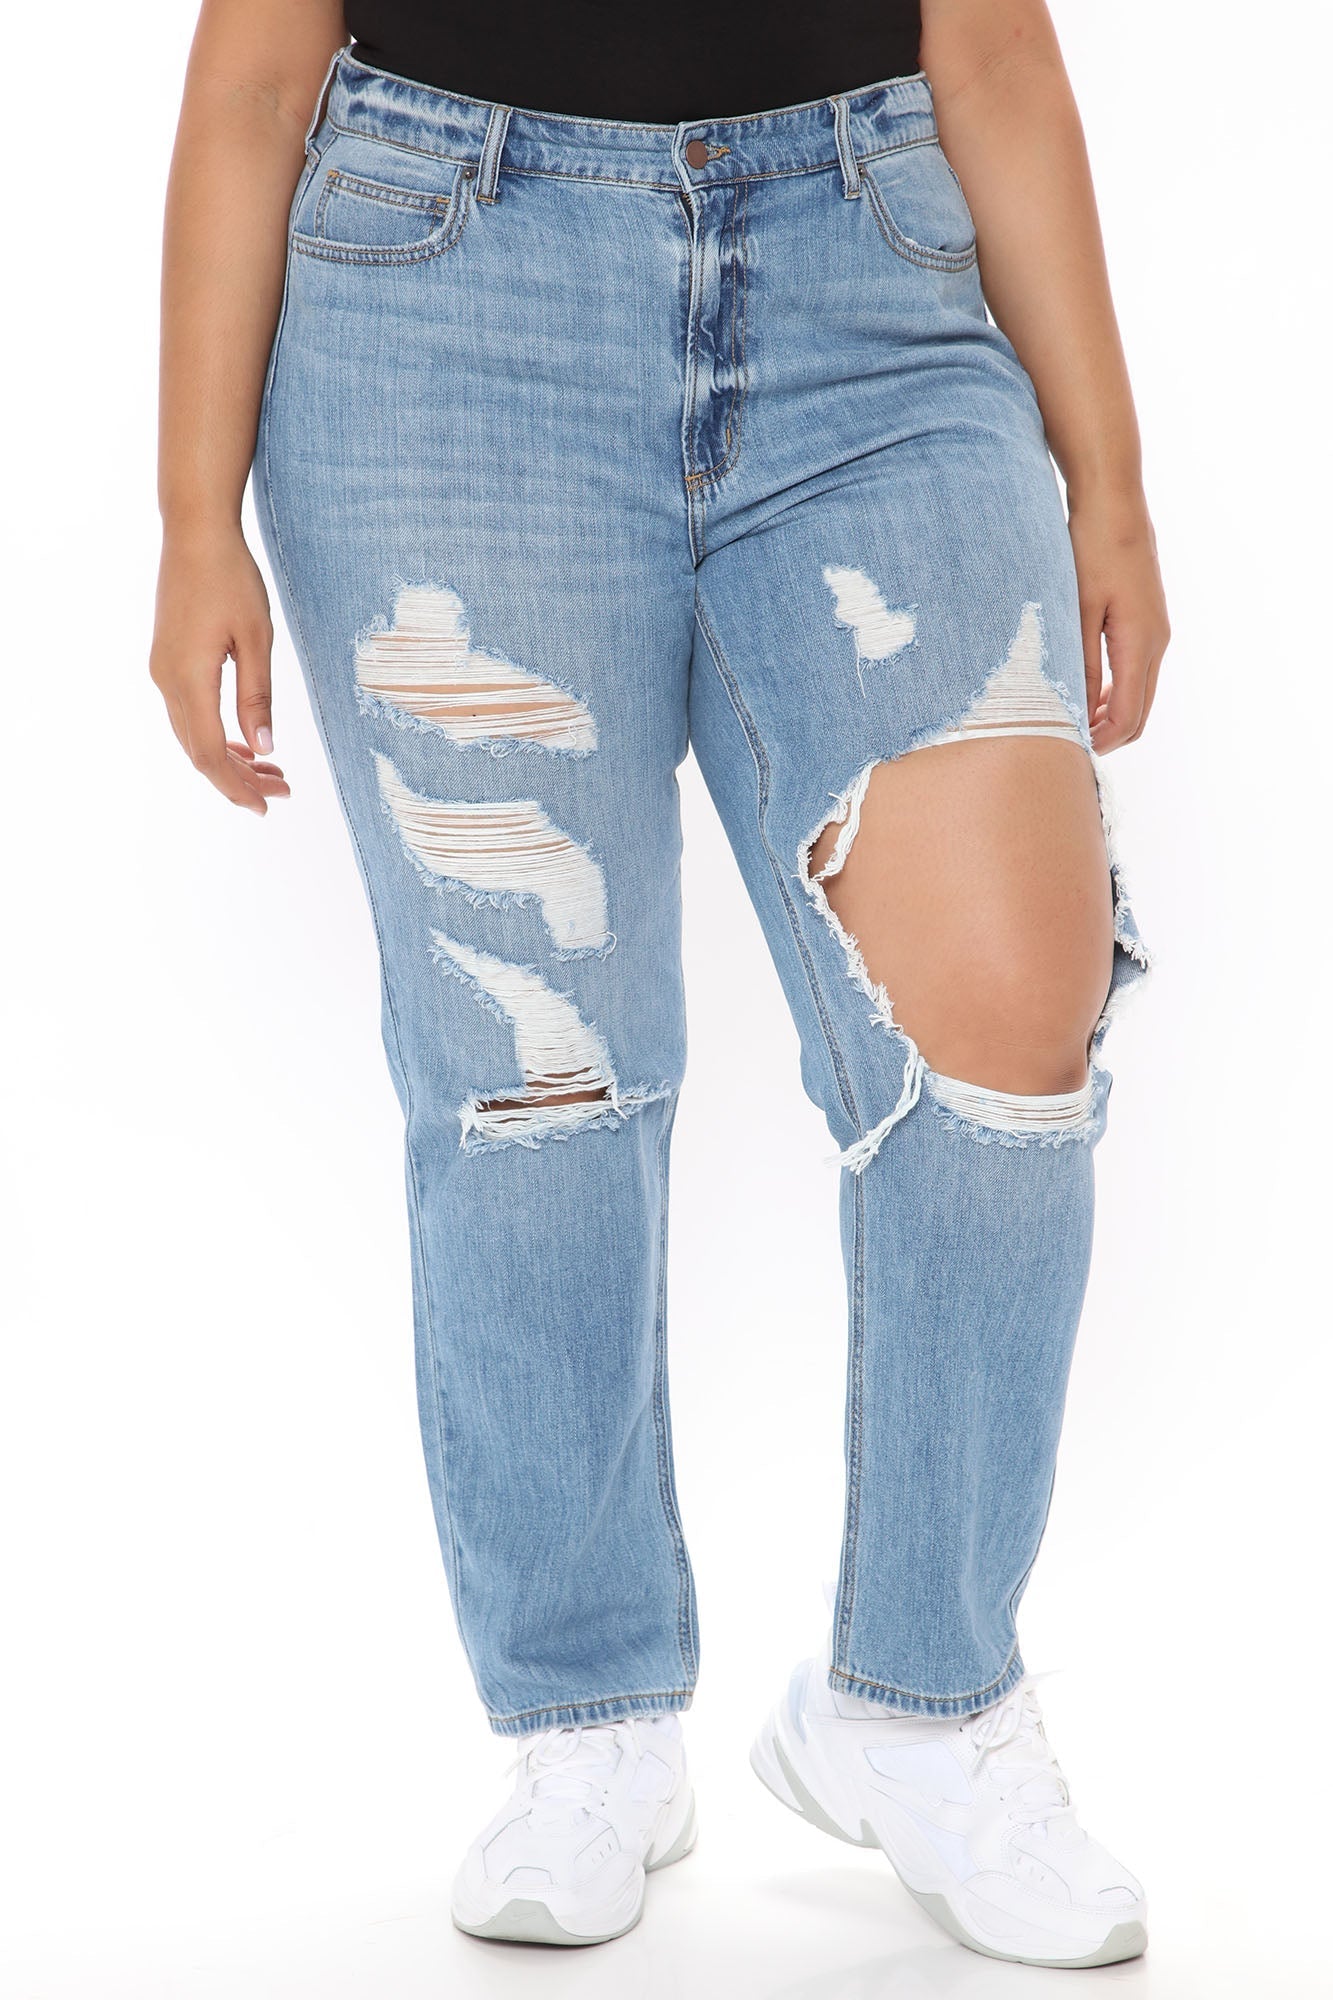 Can't Tell You Non Stretch Destroyed Jeans - Medium Blue Wash